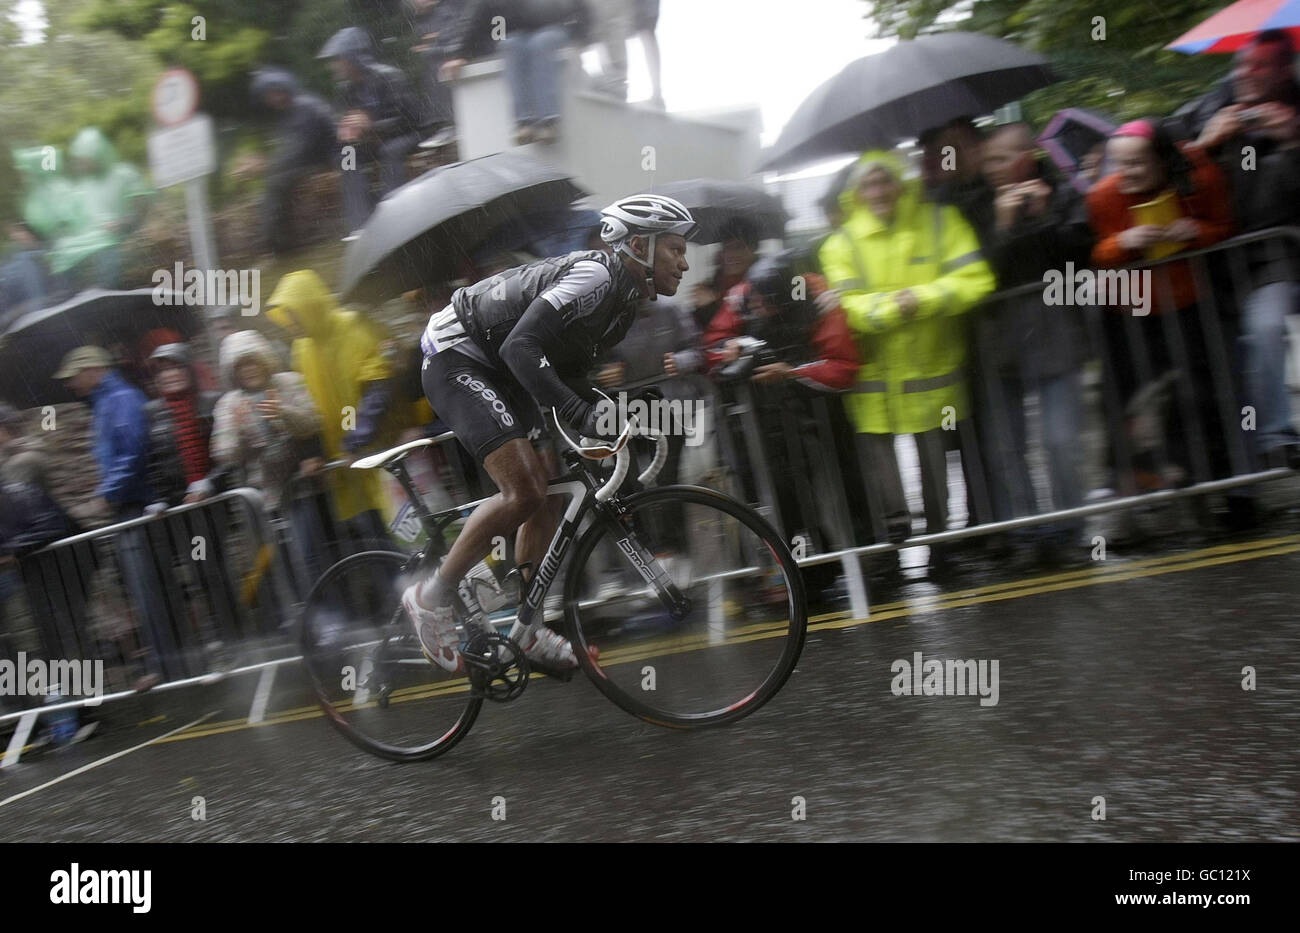 BMC Racing's Antonio Cruz makes his way up St Patrick's Hill in Cork City during Stage Three of the Tour of Ireland between Bantry and Cork in Ireland. Stock Photo